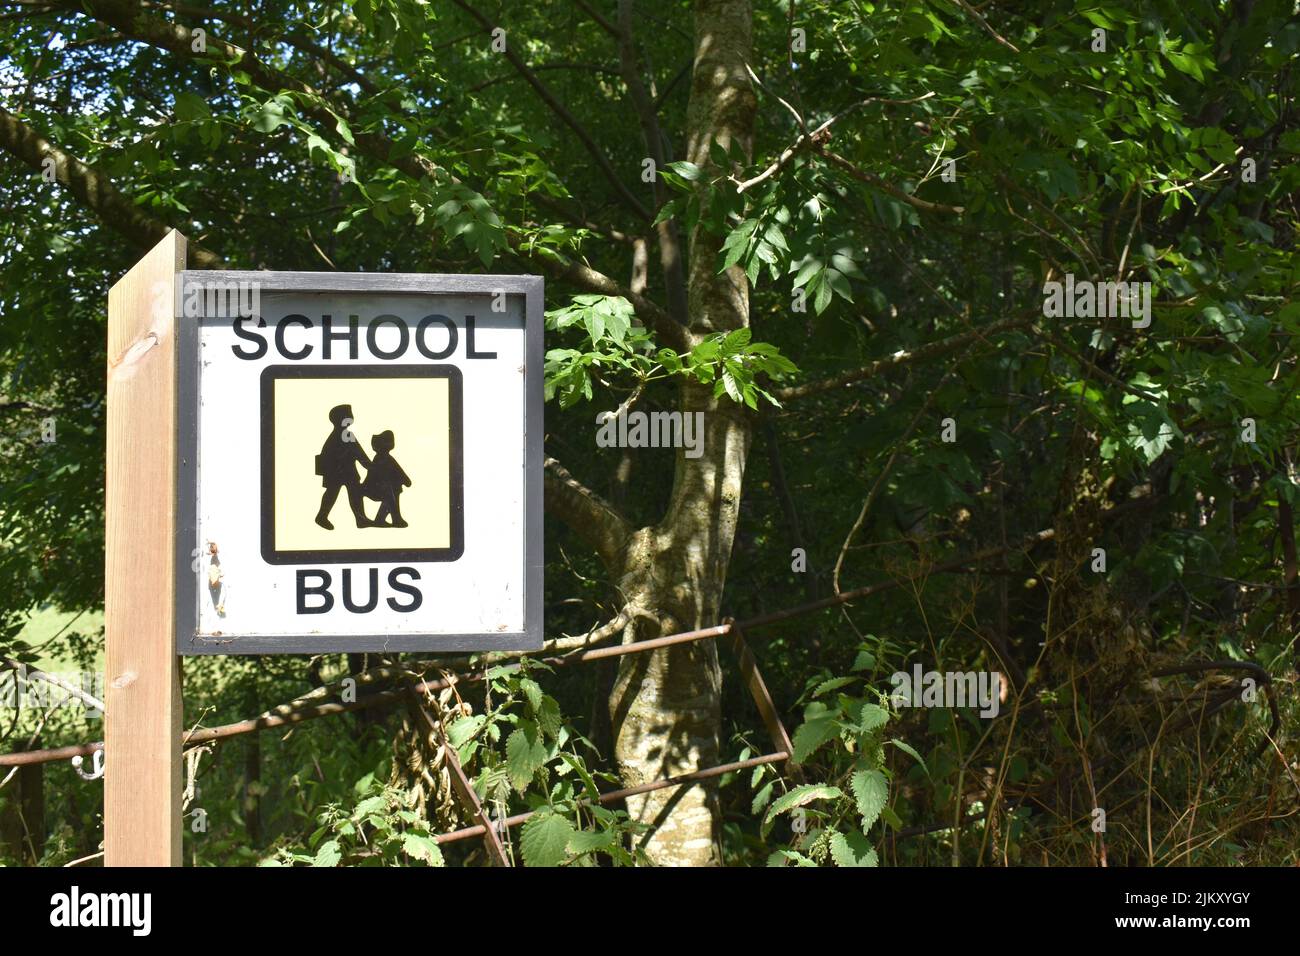 School bus sign in a rural area with copyspace. Stock Photo